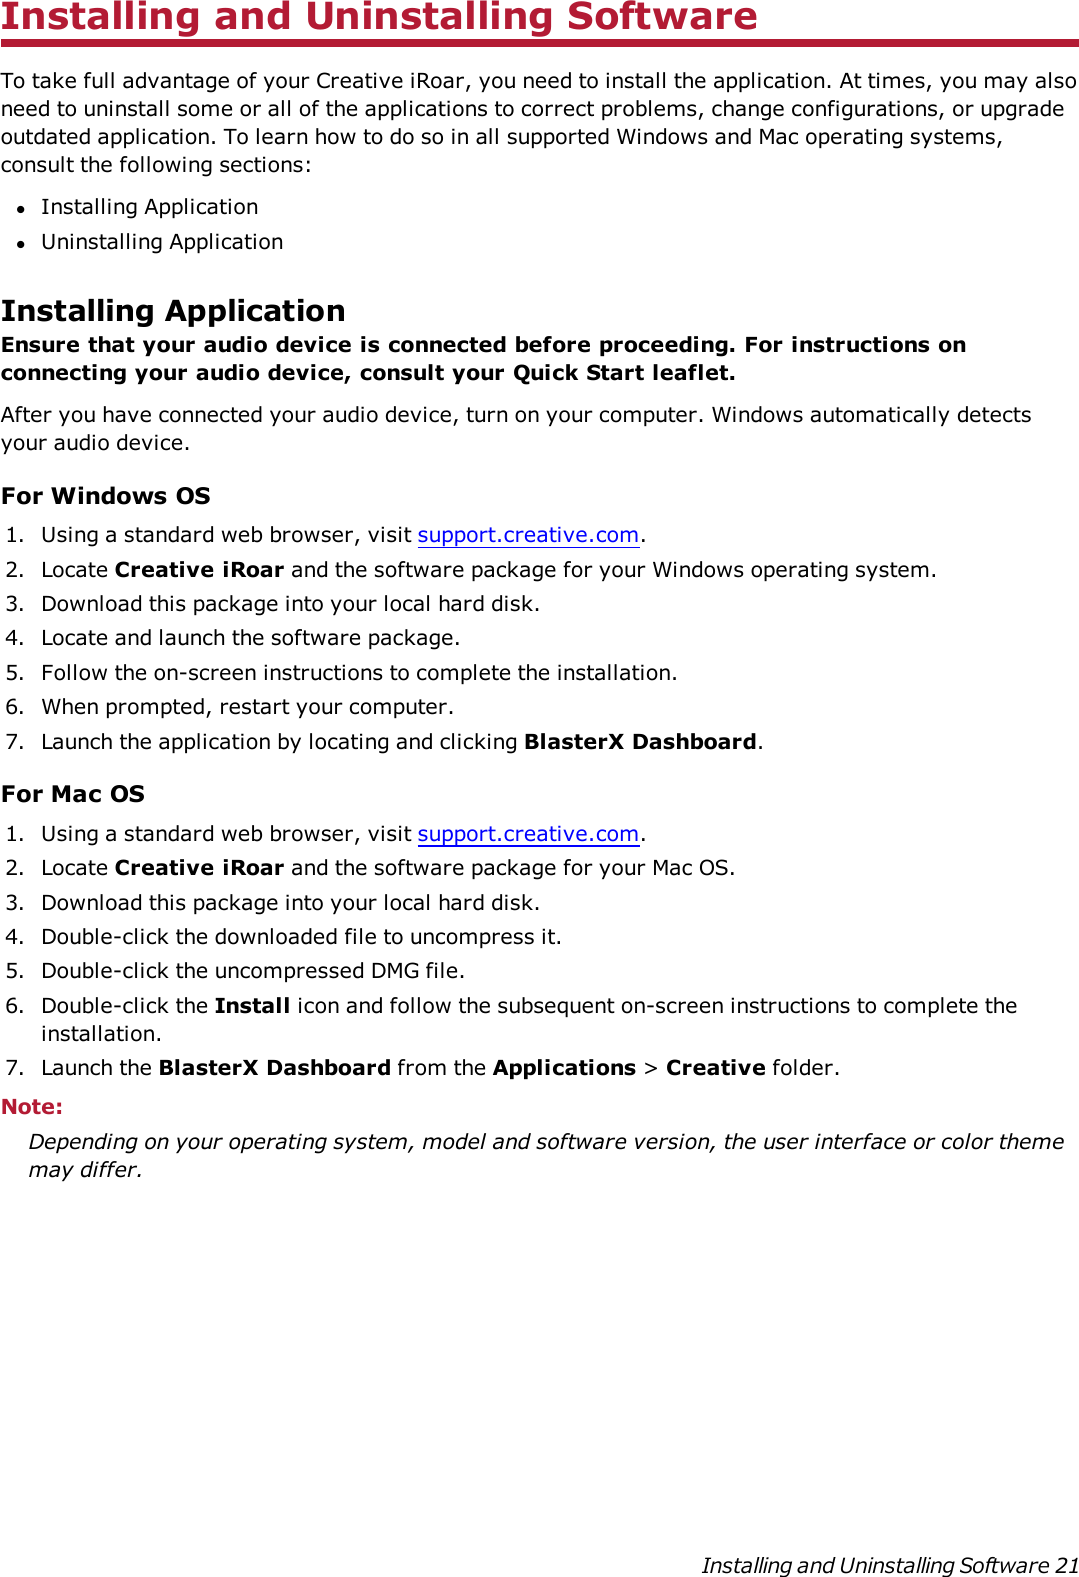 Installing and Uninstalling SoftwareTo take full advantage of your Creative iRoar, you need to install the application. At times, you may alsoneed to uninstall some or all of the applications to correct problems, change configurations, or upgradeoutdated application. To learn how to do so in all supported Windows and Mac operating systems,consult the following sections:lInstalling ApplicationlUninstalling ApplicationInstalling ApplicationEnsure that your audio device is connected before proceeding. For instructions onconnecting your audio device, consult your Quick Start leaflet.After you have connected your audio device, turn on your computer. Windows automatically detectsyour audio device.For Windows OS1. Using a standard web browser, visit support.creative.com.2. Locate Creative iRoar and the software package for your Windows operating system.3. Download this package into your local hard disk.4. Locate and launch the software package.5. Follow the on-screen instructions to complete the installation.6. When prompted, restart your computer.7. Launch the application by locating and clicking BlasterX Dashboard.For Mac OS1. Using a standard web browser, visit support.creative.com.2. Locate Creative iRoar and the software package for your Mac OS.3. Download this package into your local hard disk.4. Double-click the downloaded file to uncompress it.5. Double-click the uncompressed DMG file.6. Double-click the Install icon and follow the subsequent on-screen instructions to complete theinstallation.7. Launch the BlasterX Dashboard from the Applications &gt;Creative folder.Note:Depending on your operating system, model and software version, the user interface or color thememay differ.Installing and Uninstalling Software 21